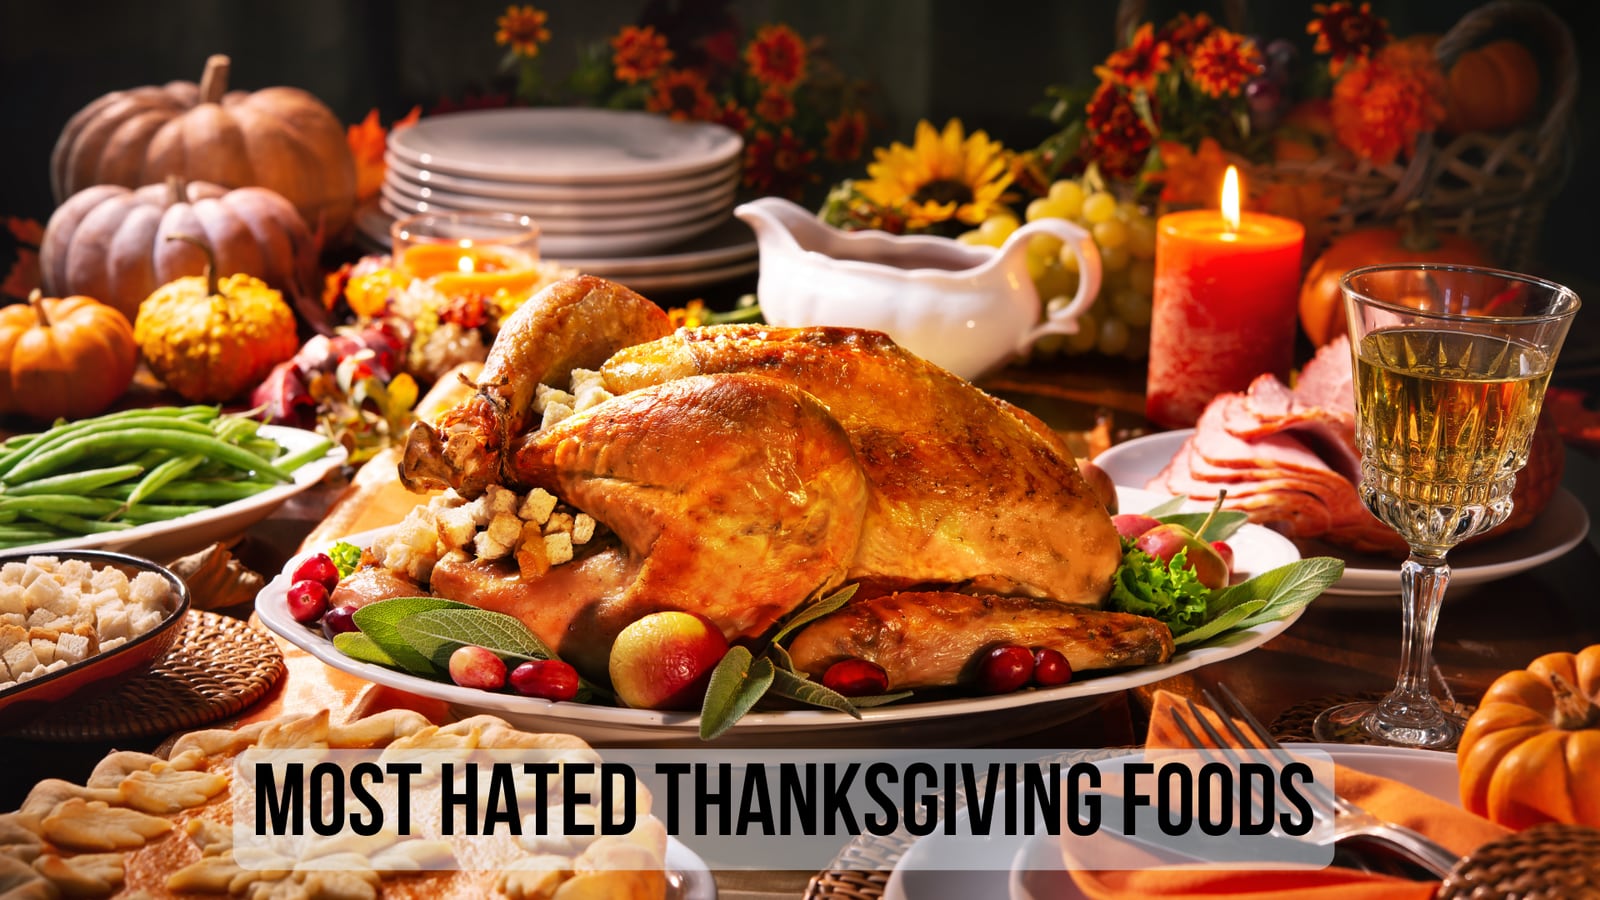 PHOTOS: Most hated Thanksgiving foods – WHIO TV 7 and WHIO Radio